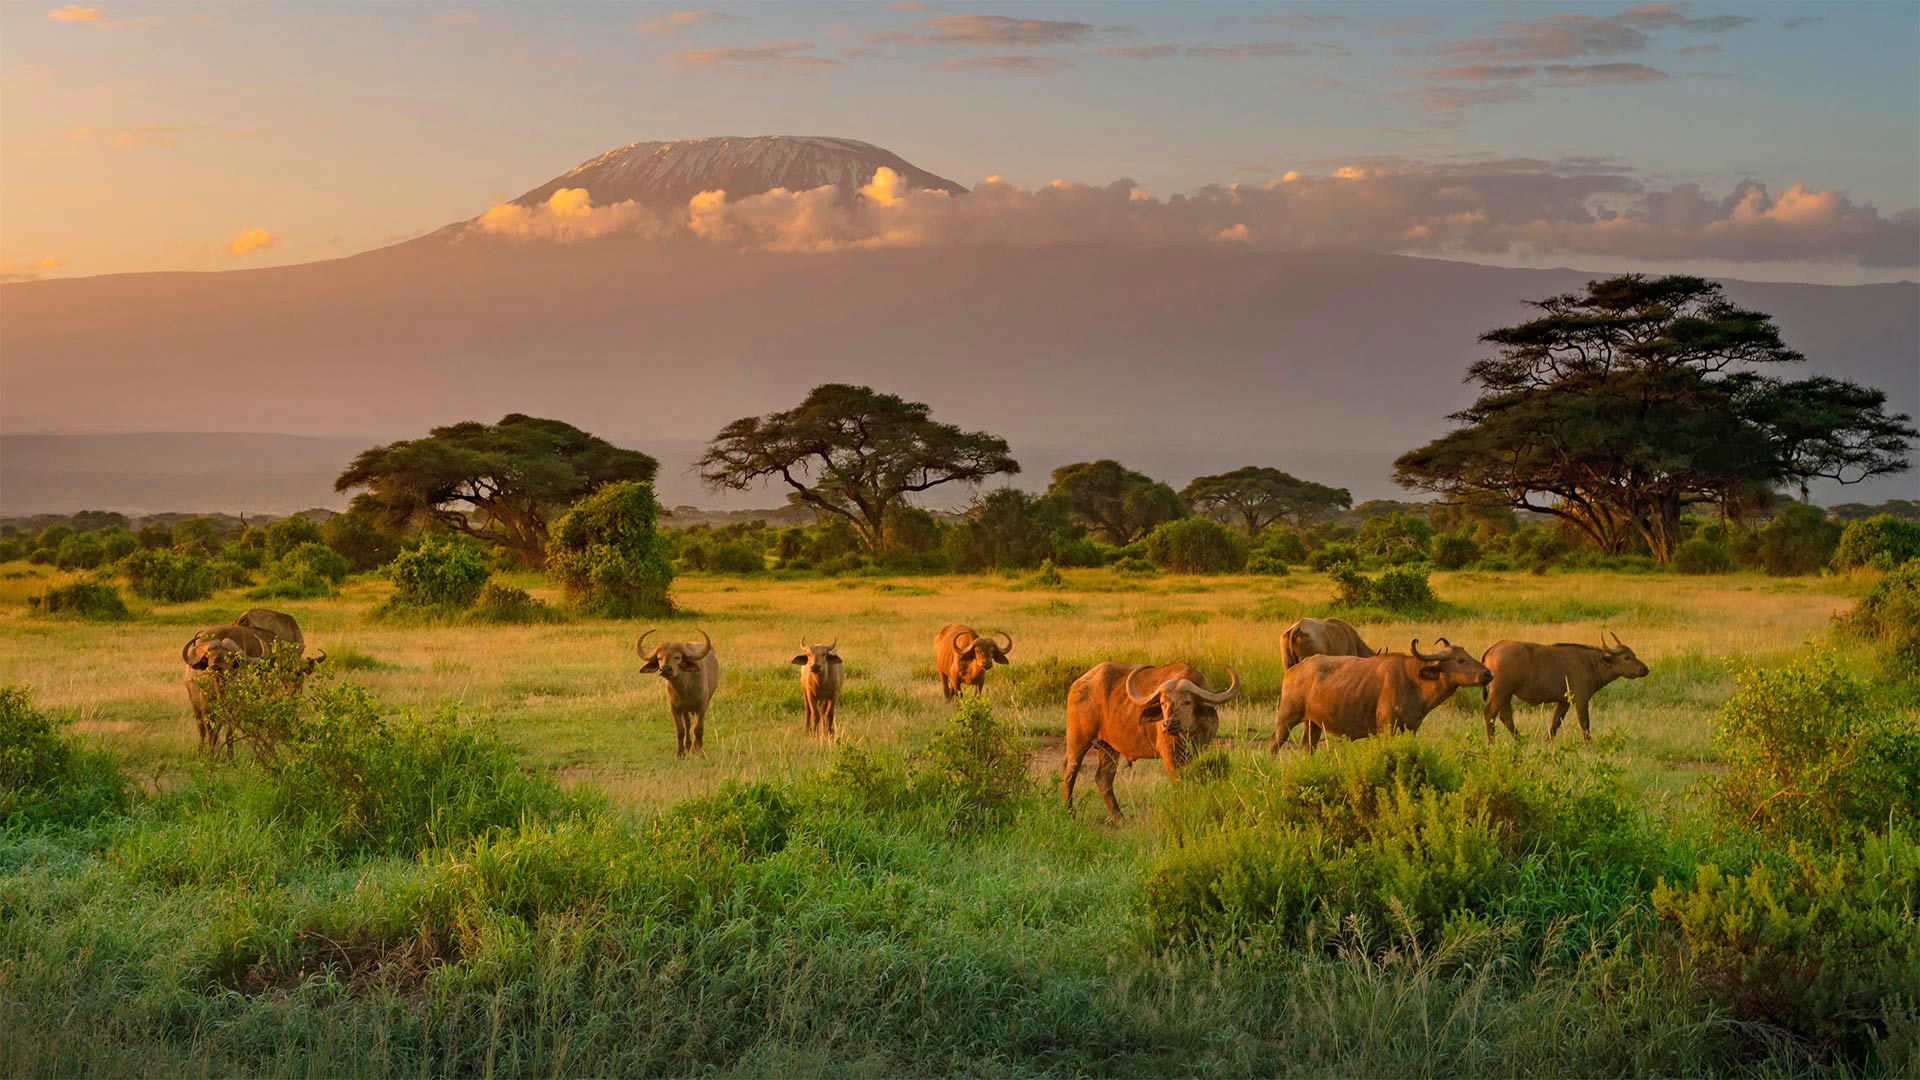 Mount Kilimanjaro with Cape buffaloes in foreground, Amboseli Biosphere Reserve, Kenya - RealityImages/Shutterstock)